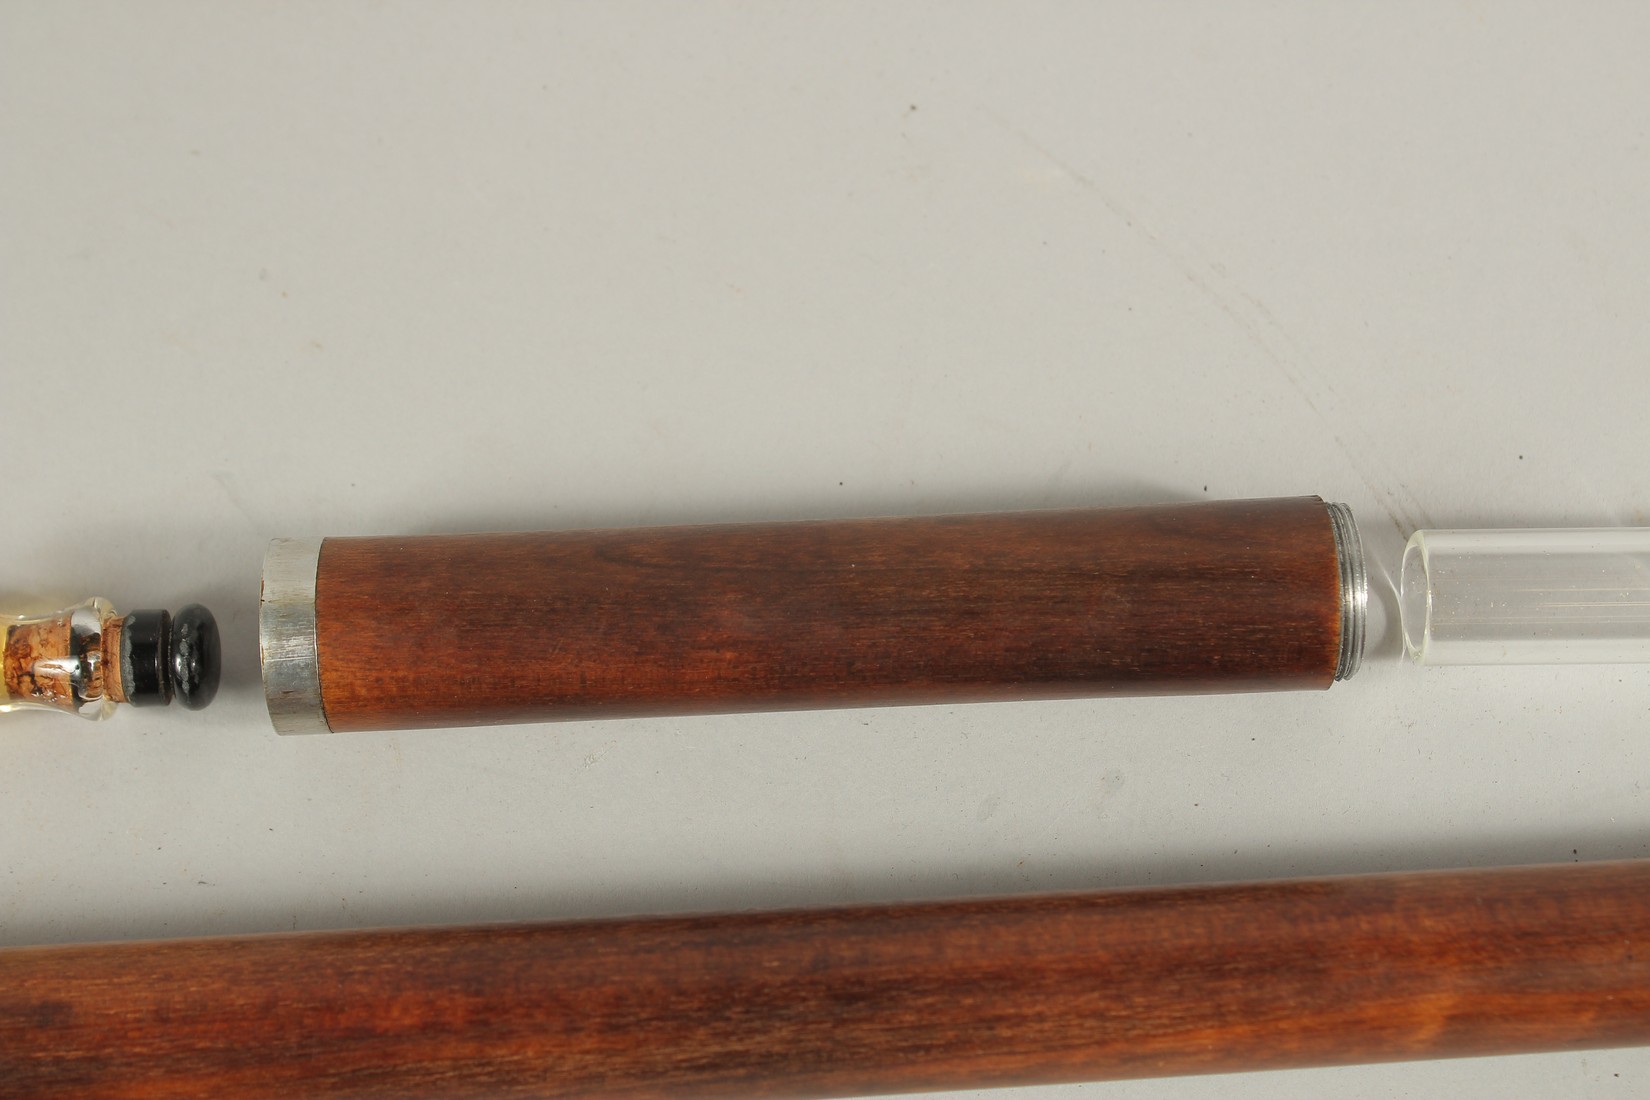 A RARE 19TH CENTURY WALKING STICK with metal top and two screw off sections revealing a long glass - Image 5 of 7